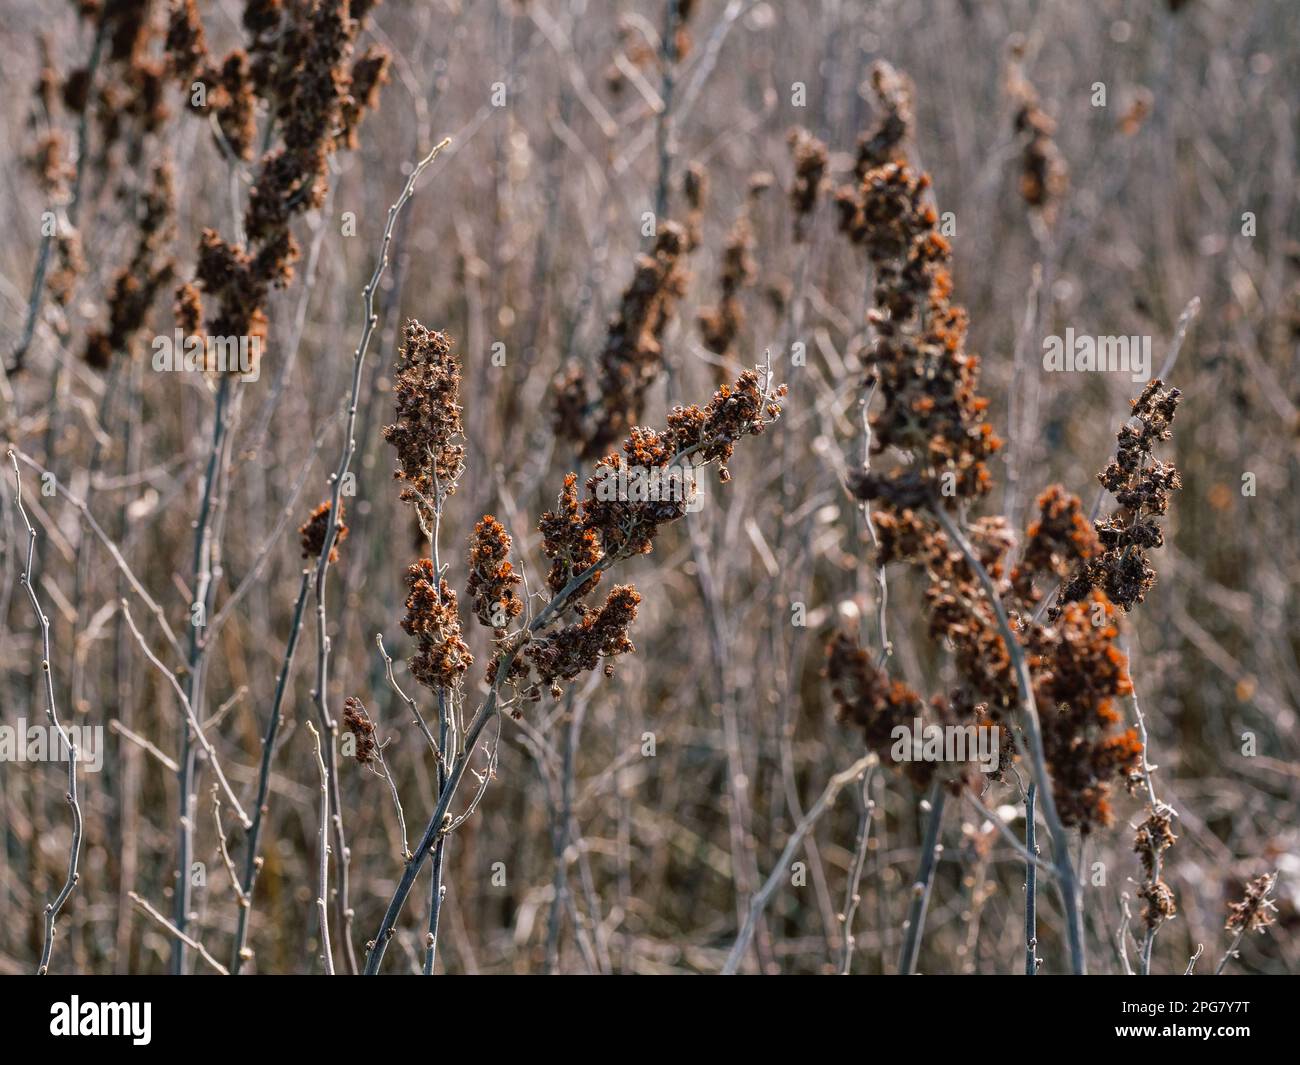 A field of dried Spirea Douglas plants with brown wilted stems and inflorescences Stock Photo